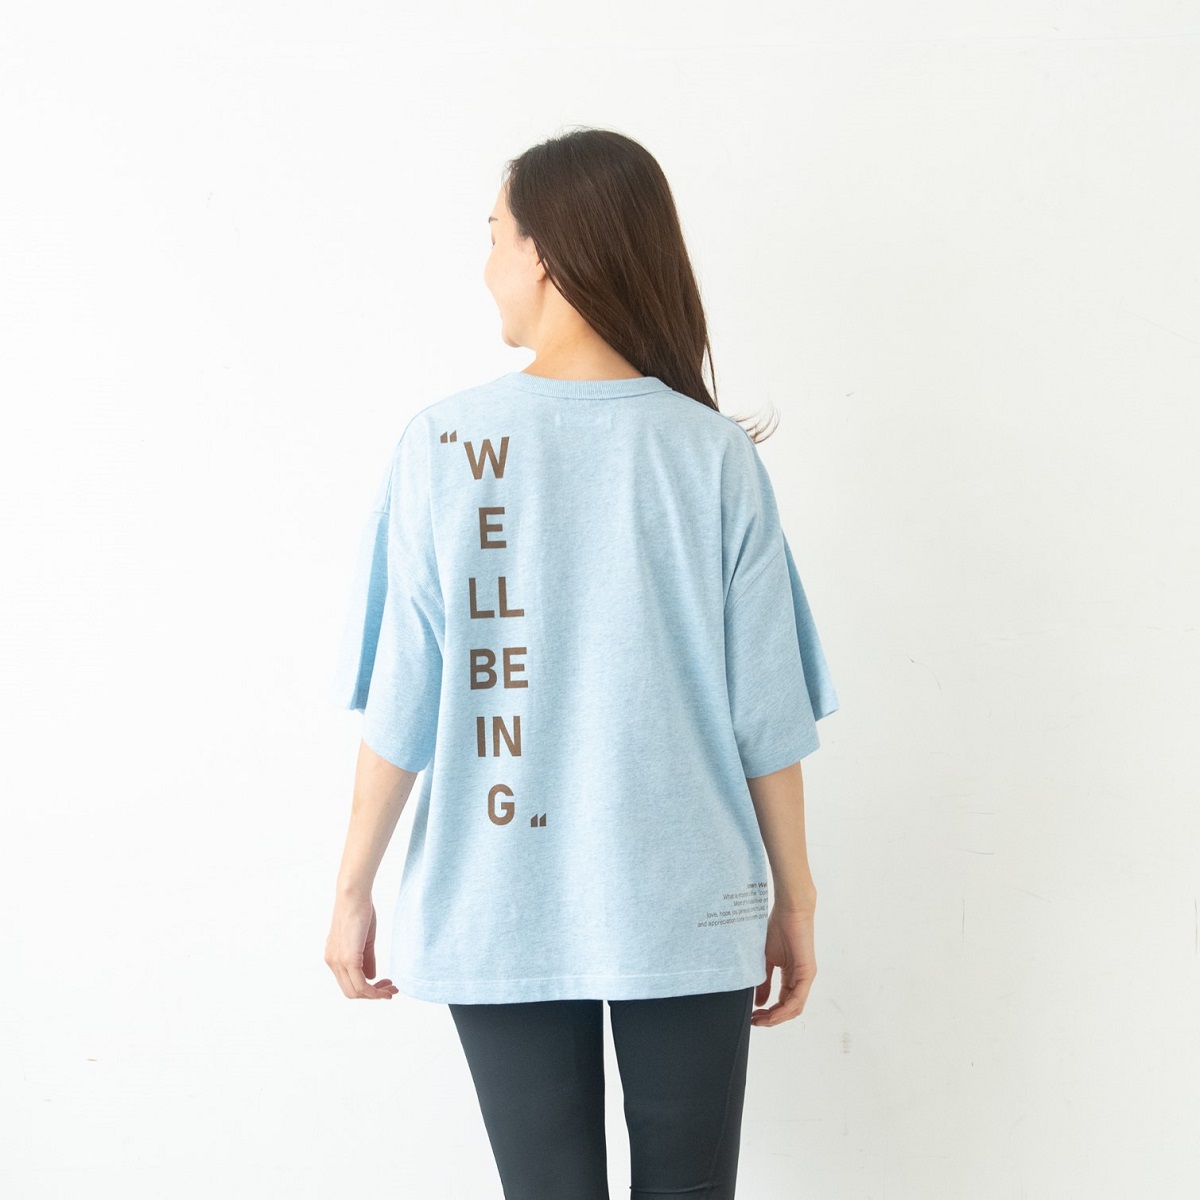 Well-being　リカバーTシャツ ライトブルー ＸＳ